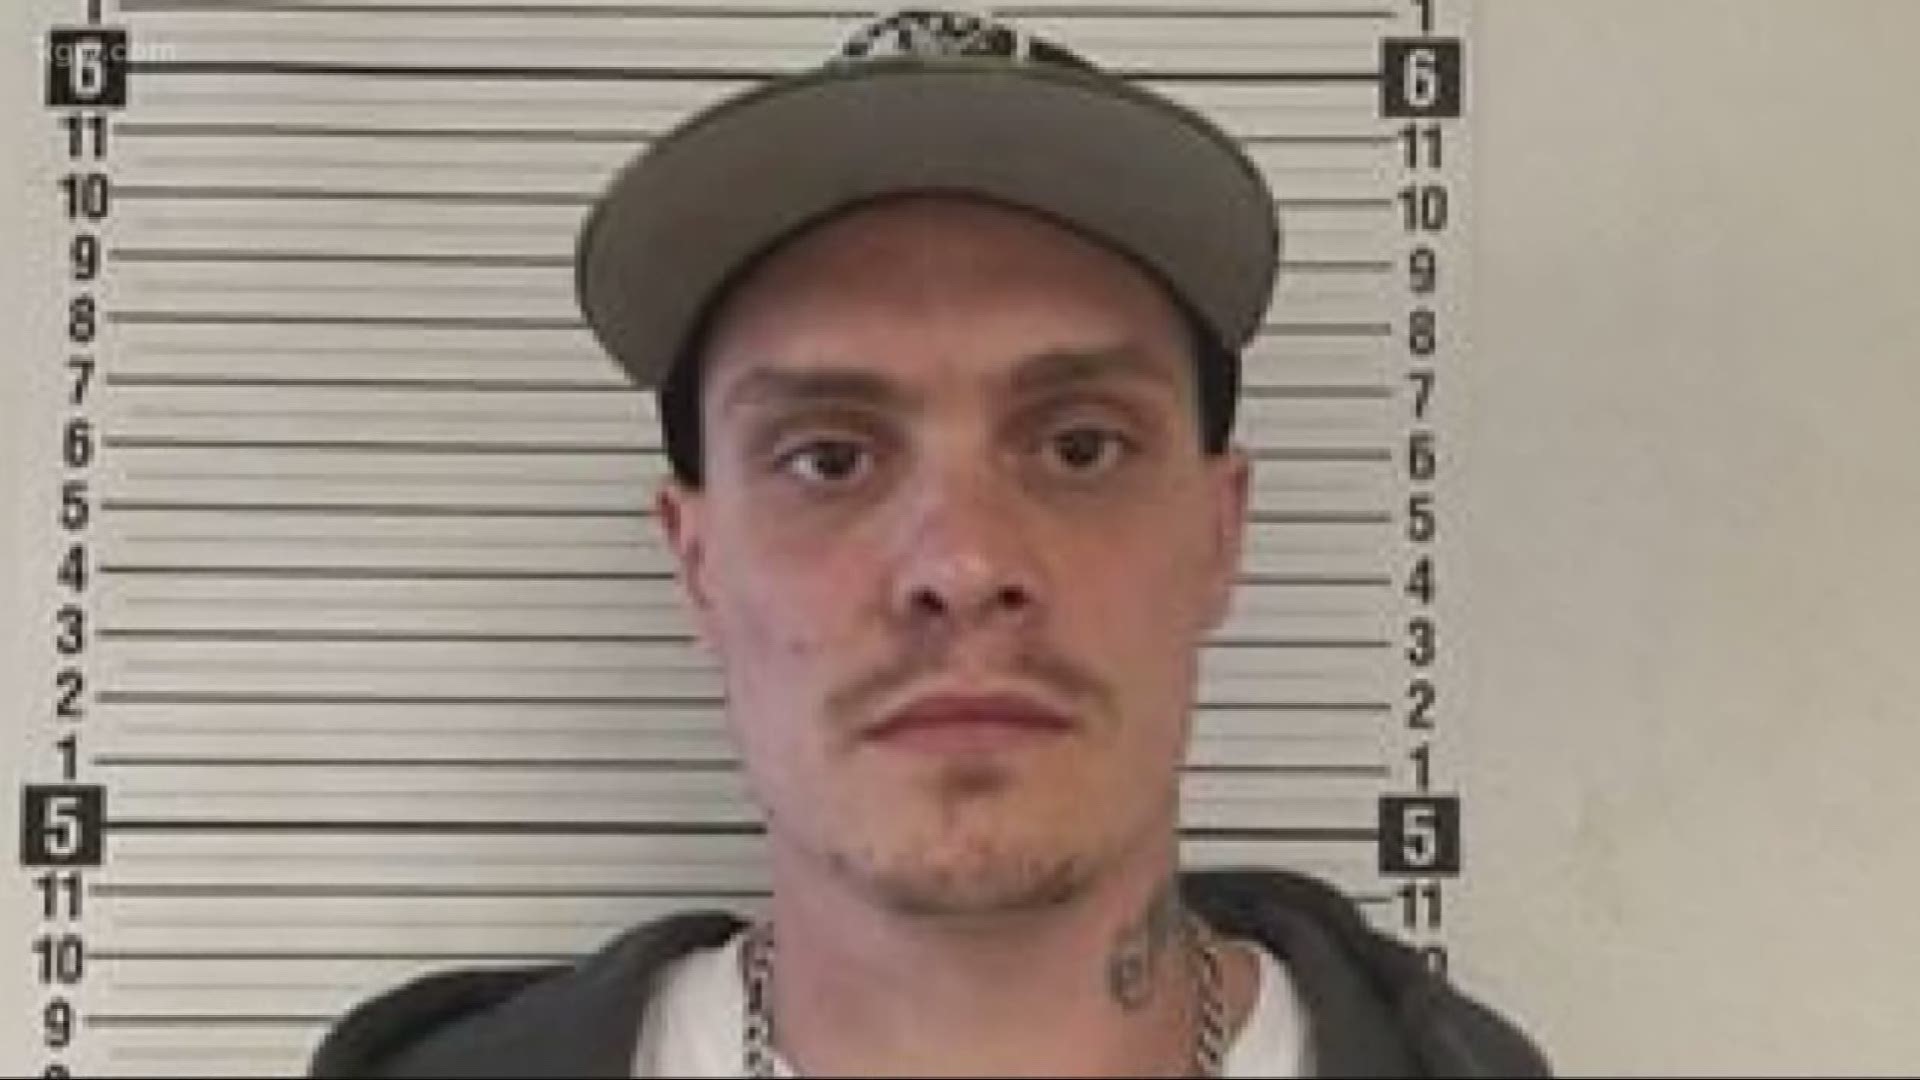 Brian Butts is suspected of murdering Cowlitz County deputy Justin DeRoiser. His half brother and cousin Daniel Butts murdered Rainier police chief Ralph Painter.